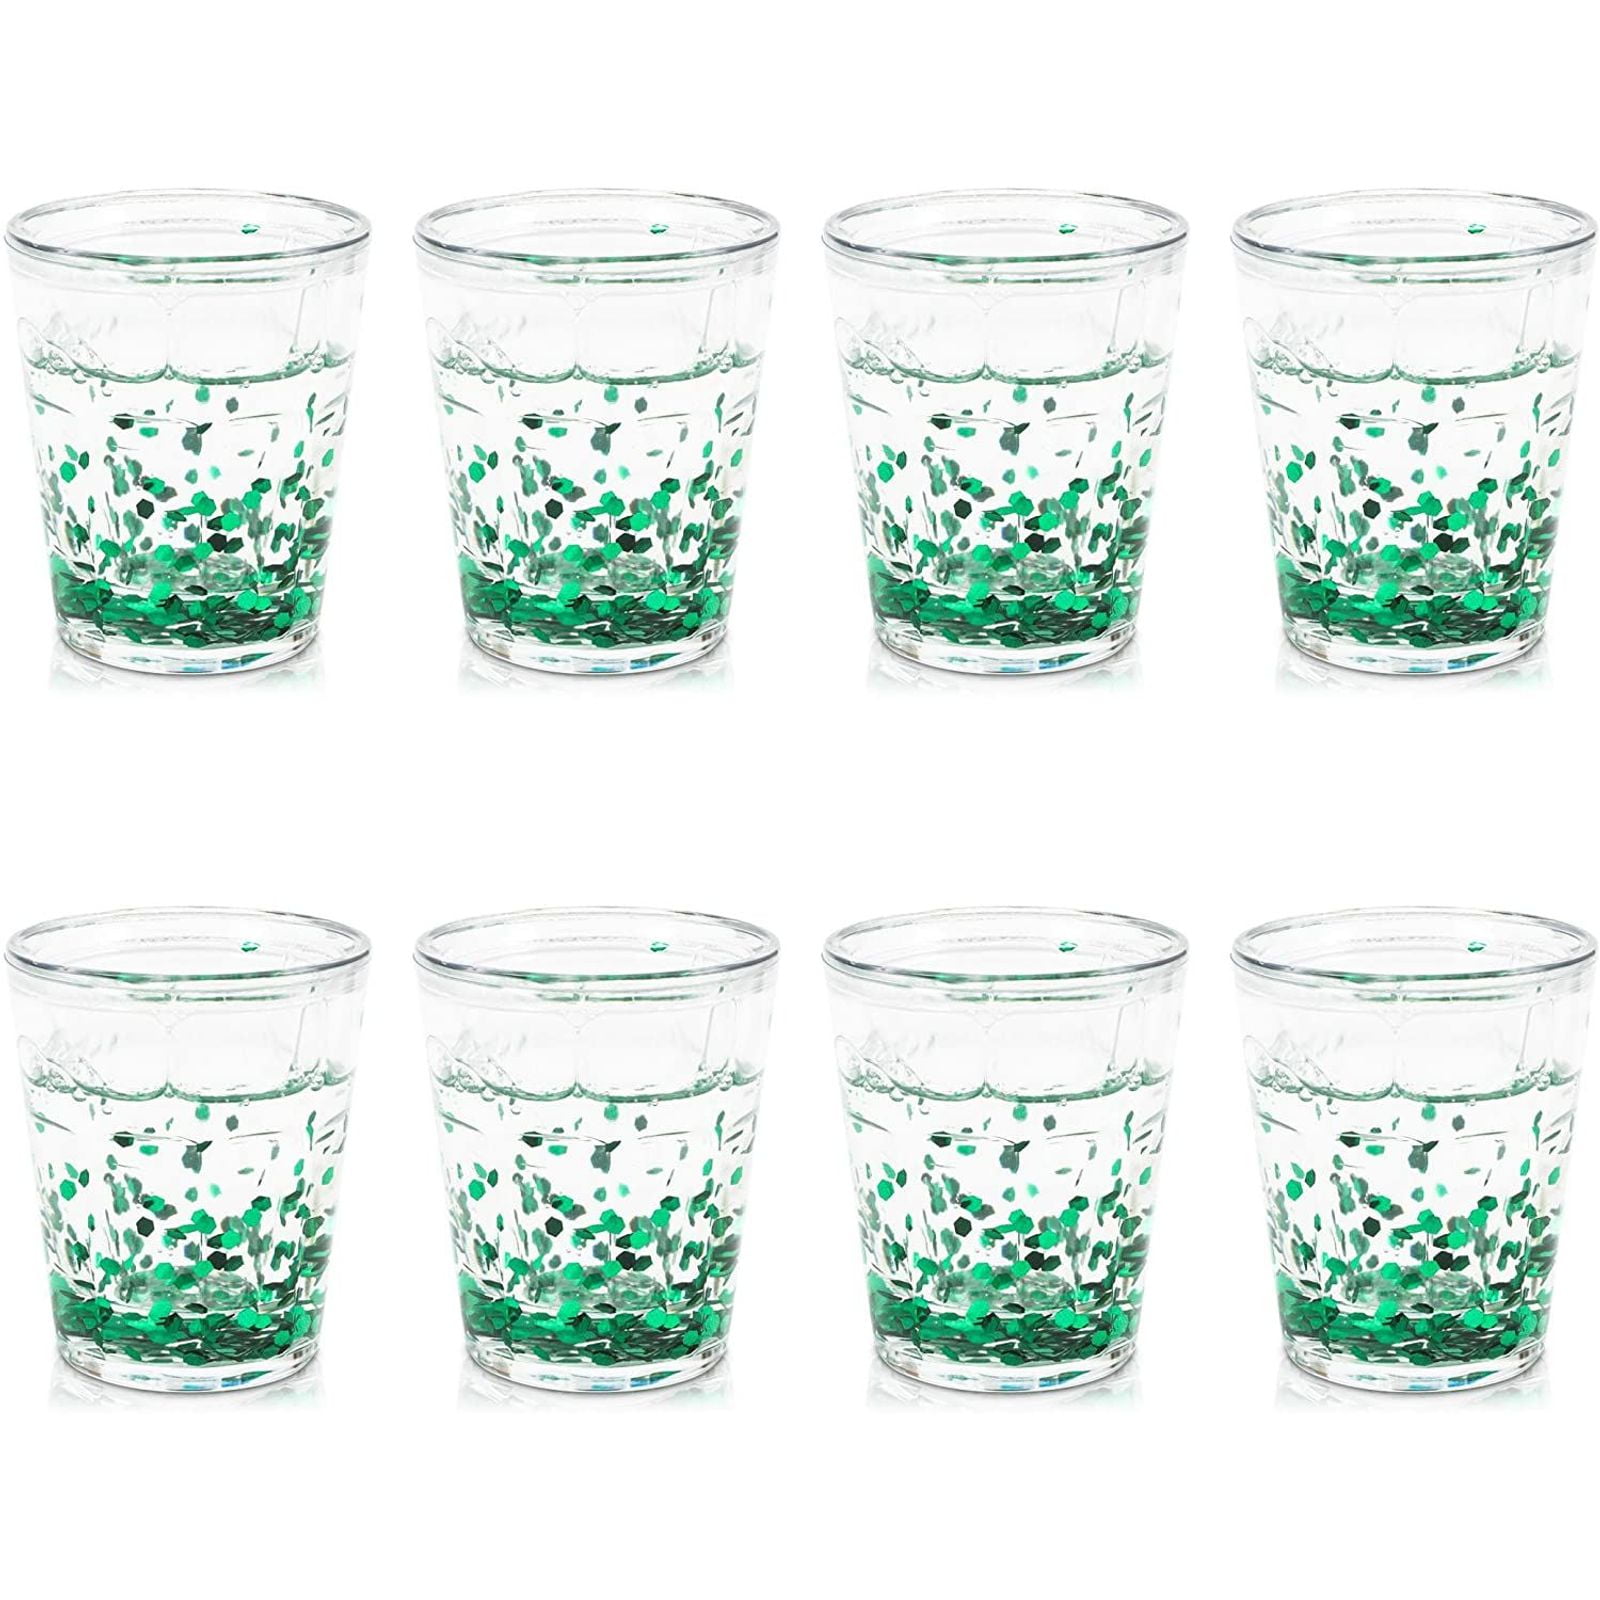 Confetti Glitter Shot Glasses for Parties Green, 8 Pack 